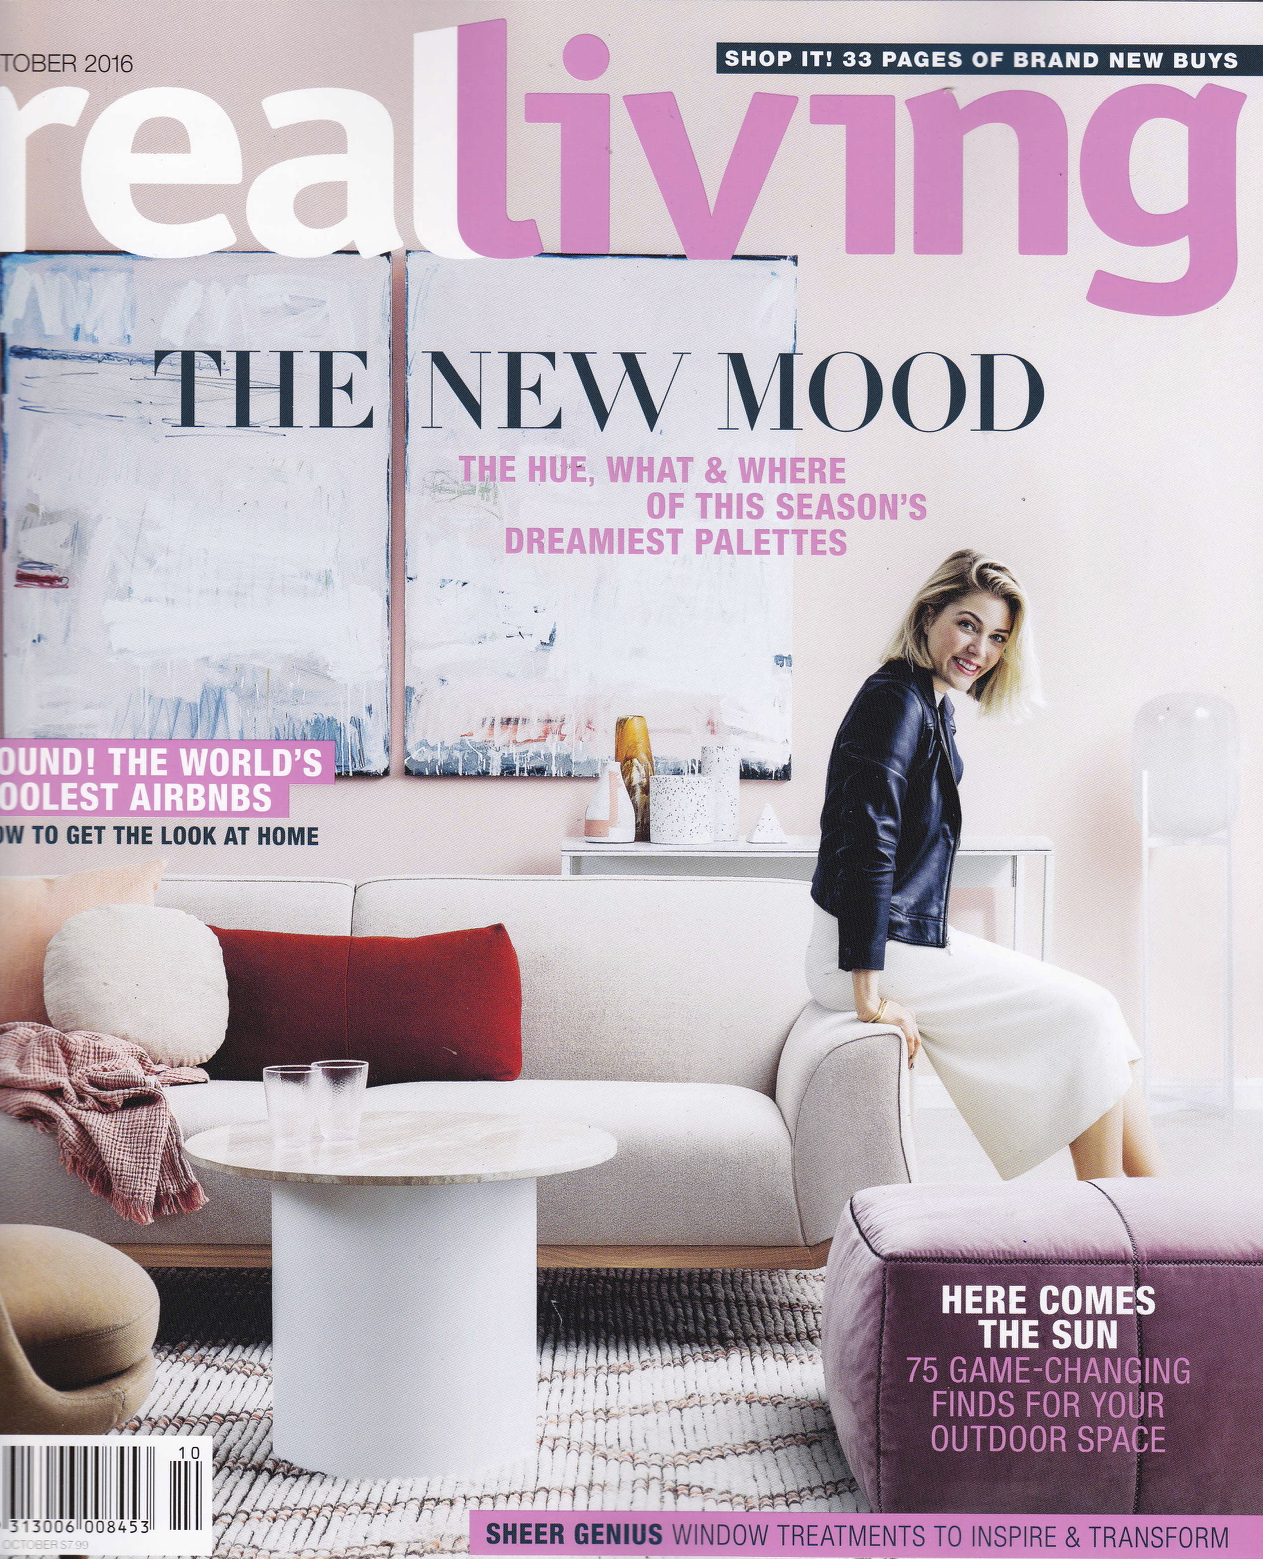 FEATURED ON THE COVER OF REAL LIVING